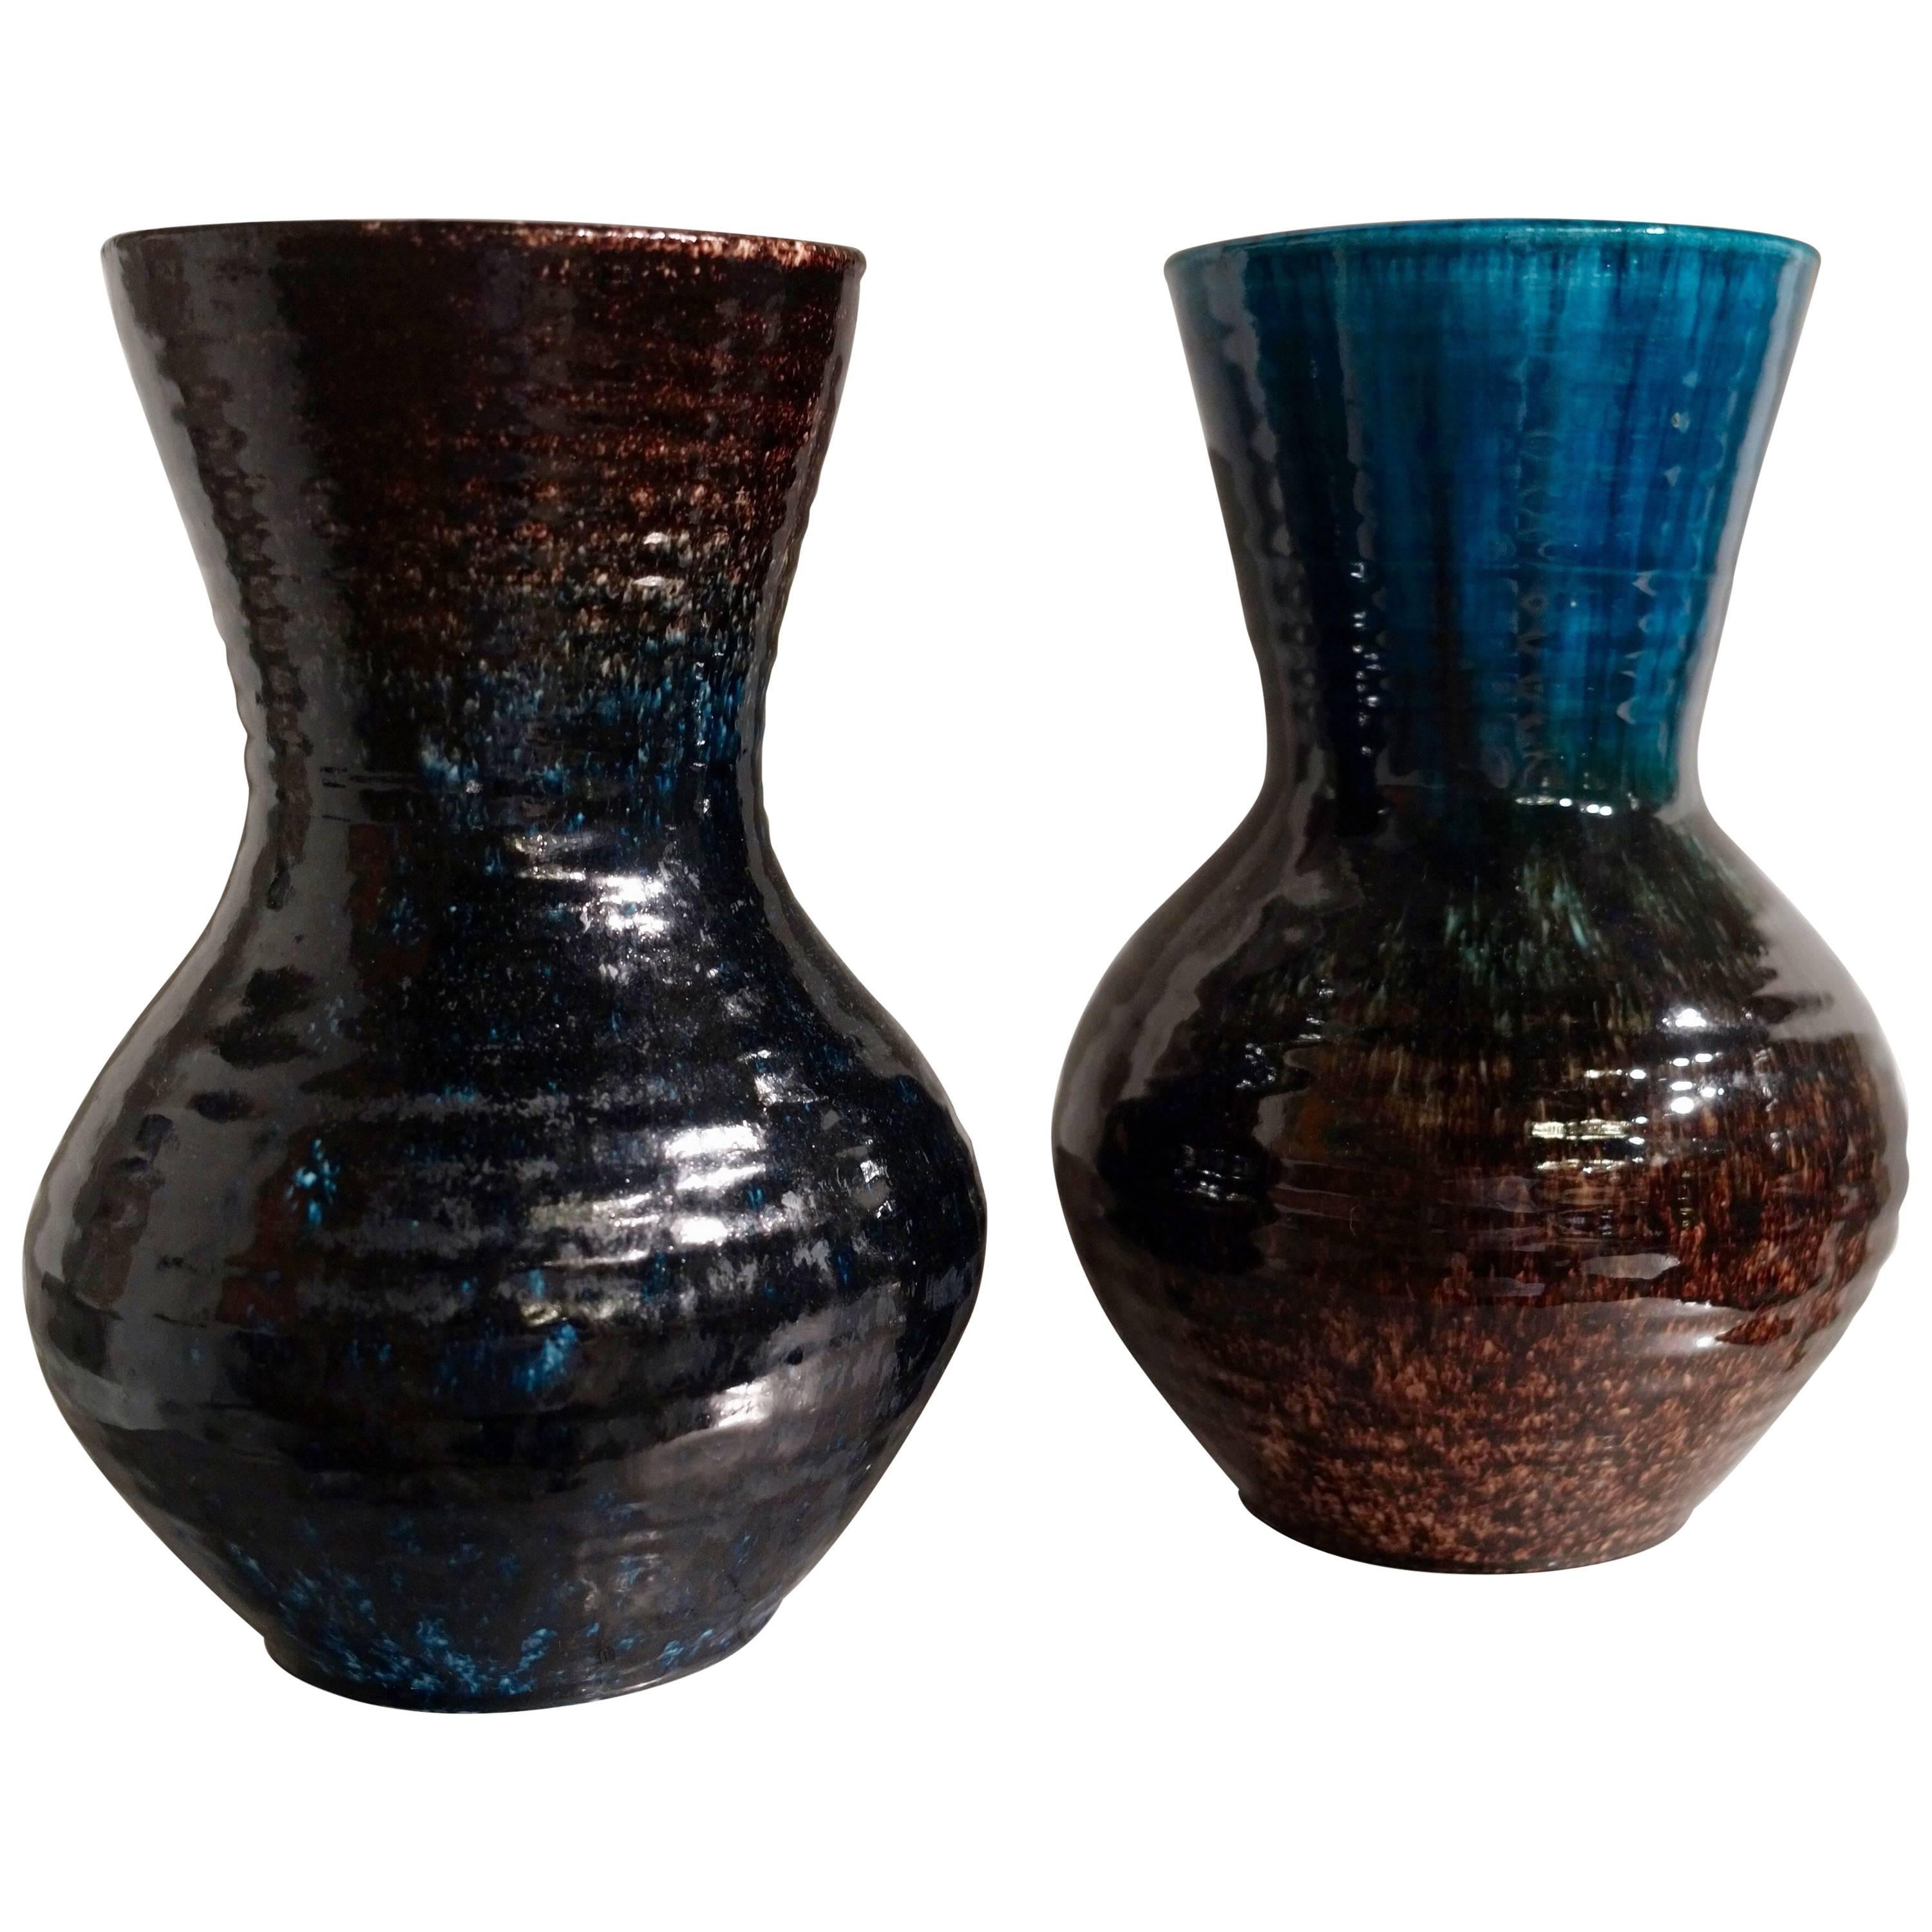 Blue Bordeaux Brown Glaze Pair of Vases by Accolay Pottery, France, circa 1950